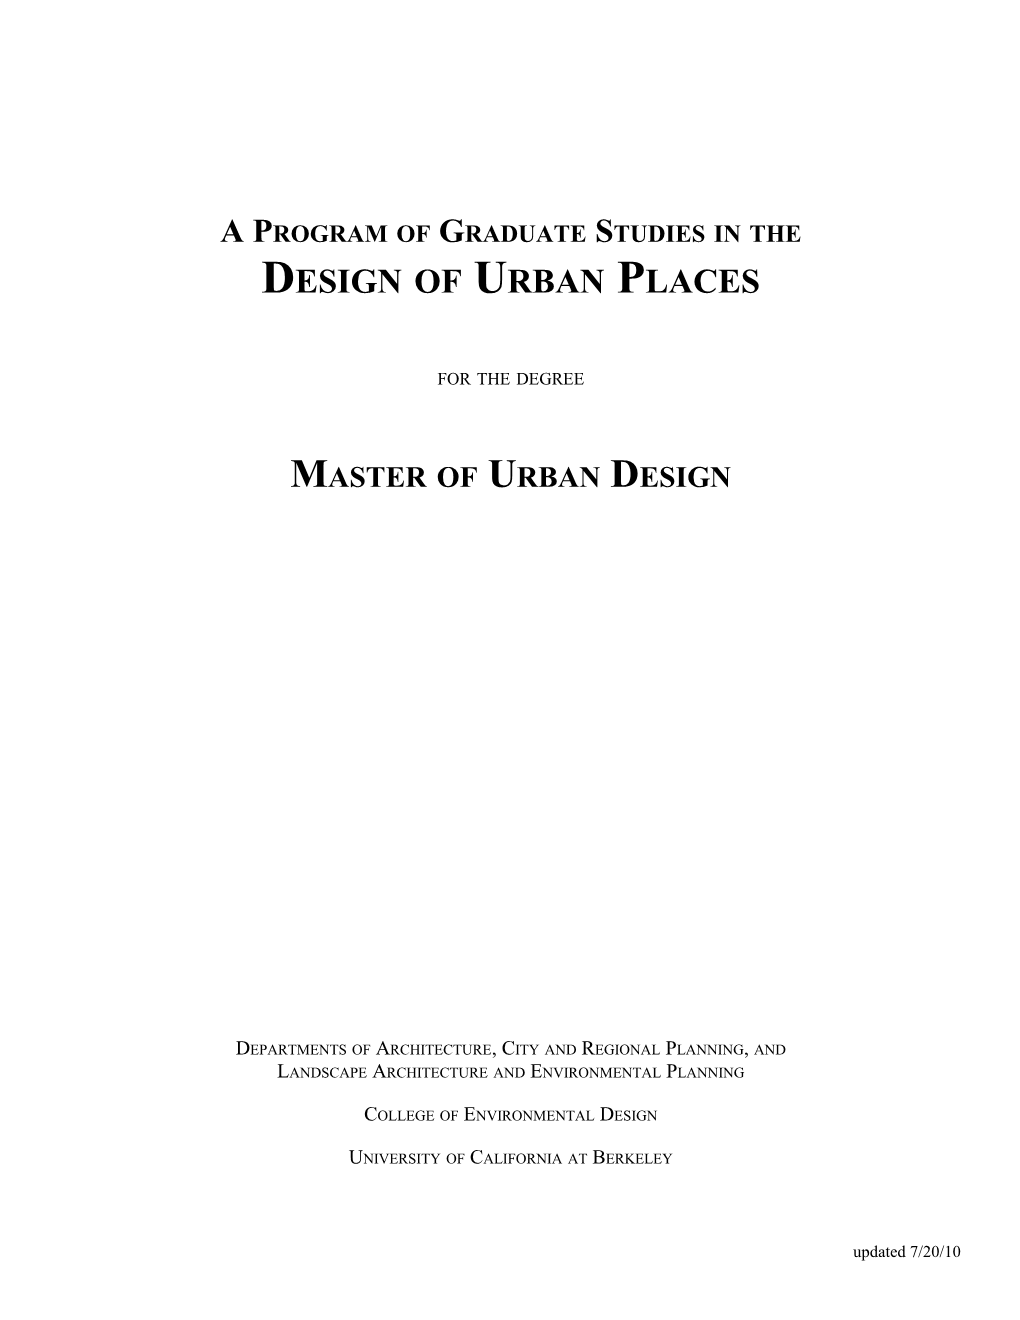 A Program of Graduate Studies in the Design of Urban Places for the Degree Master of Urban